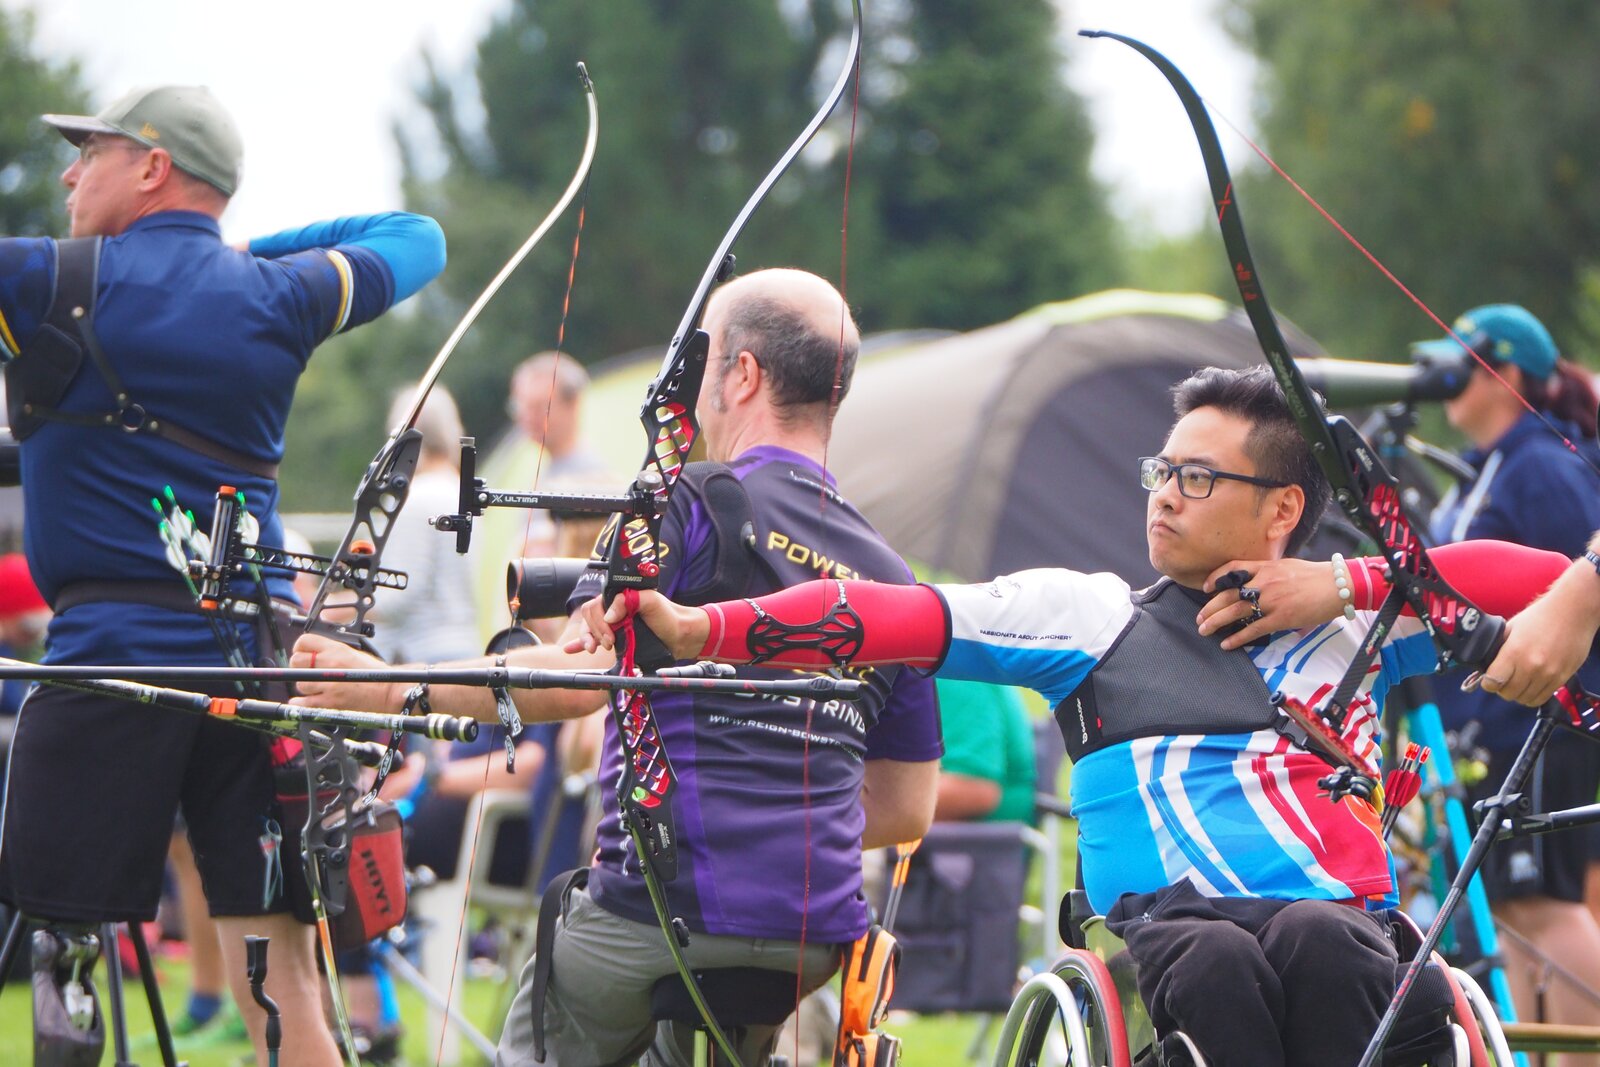 Archery GB Paralympic Performance Opportunity Events